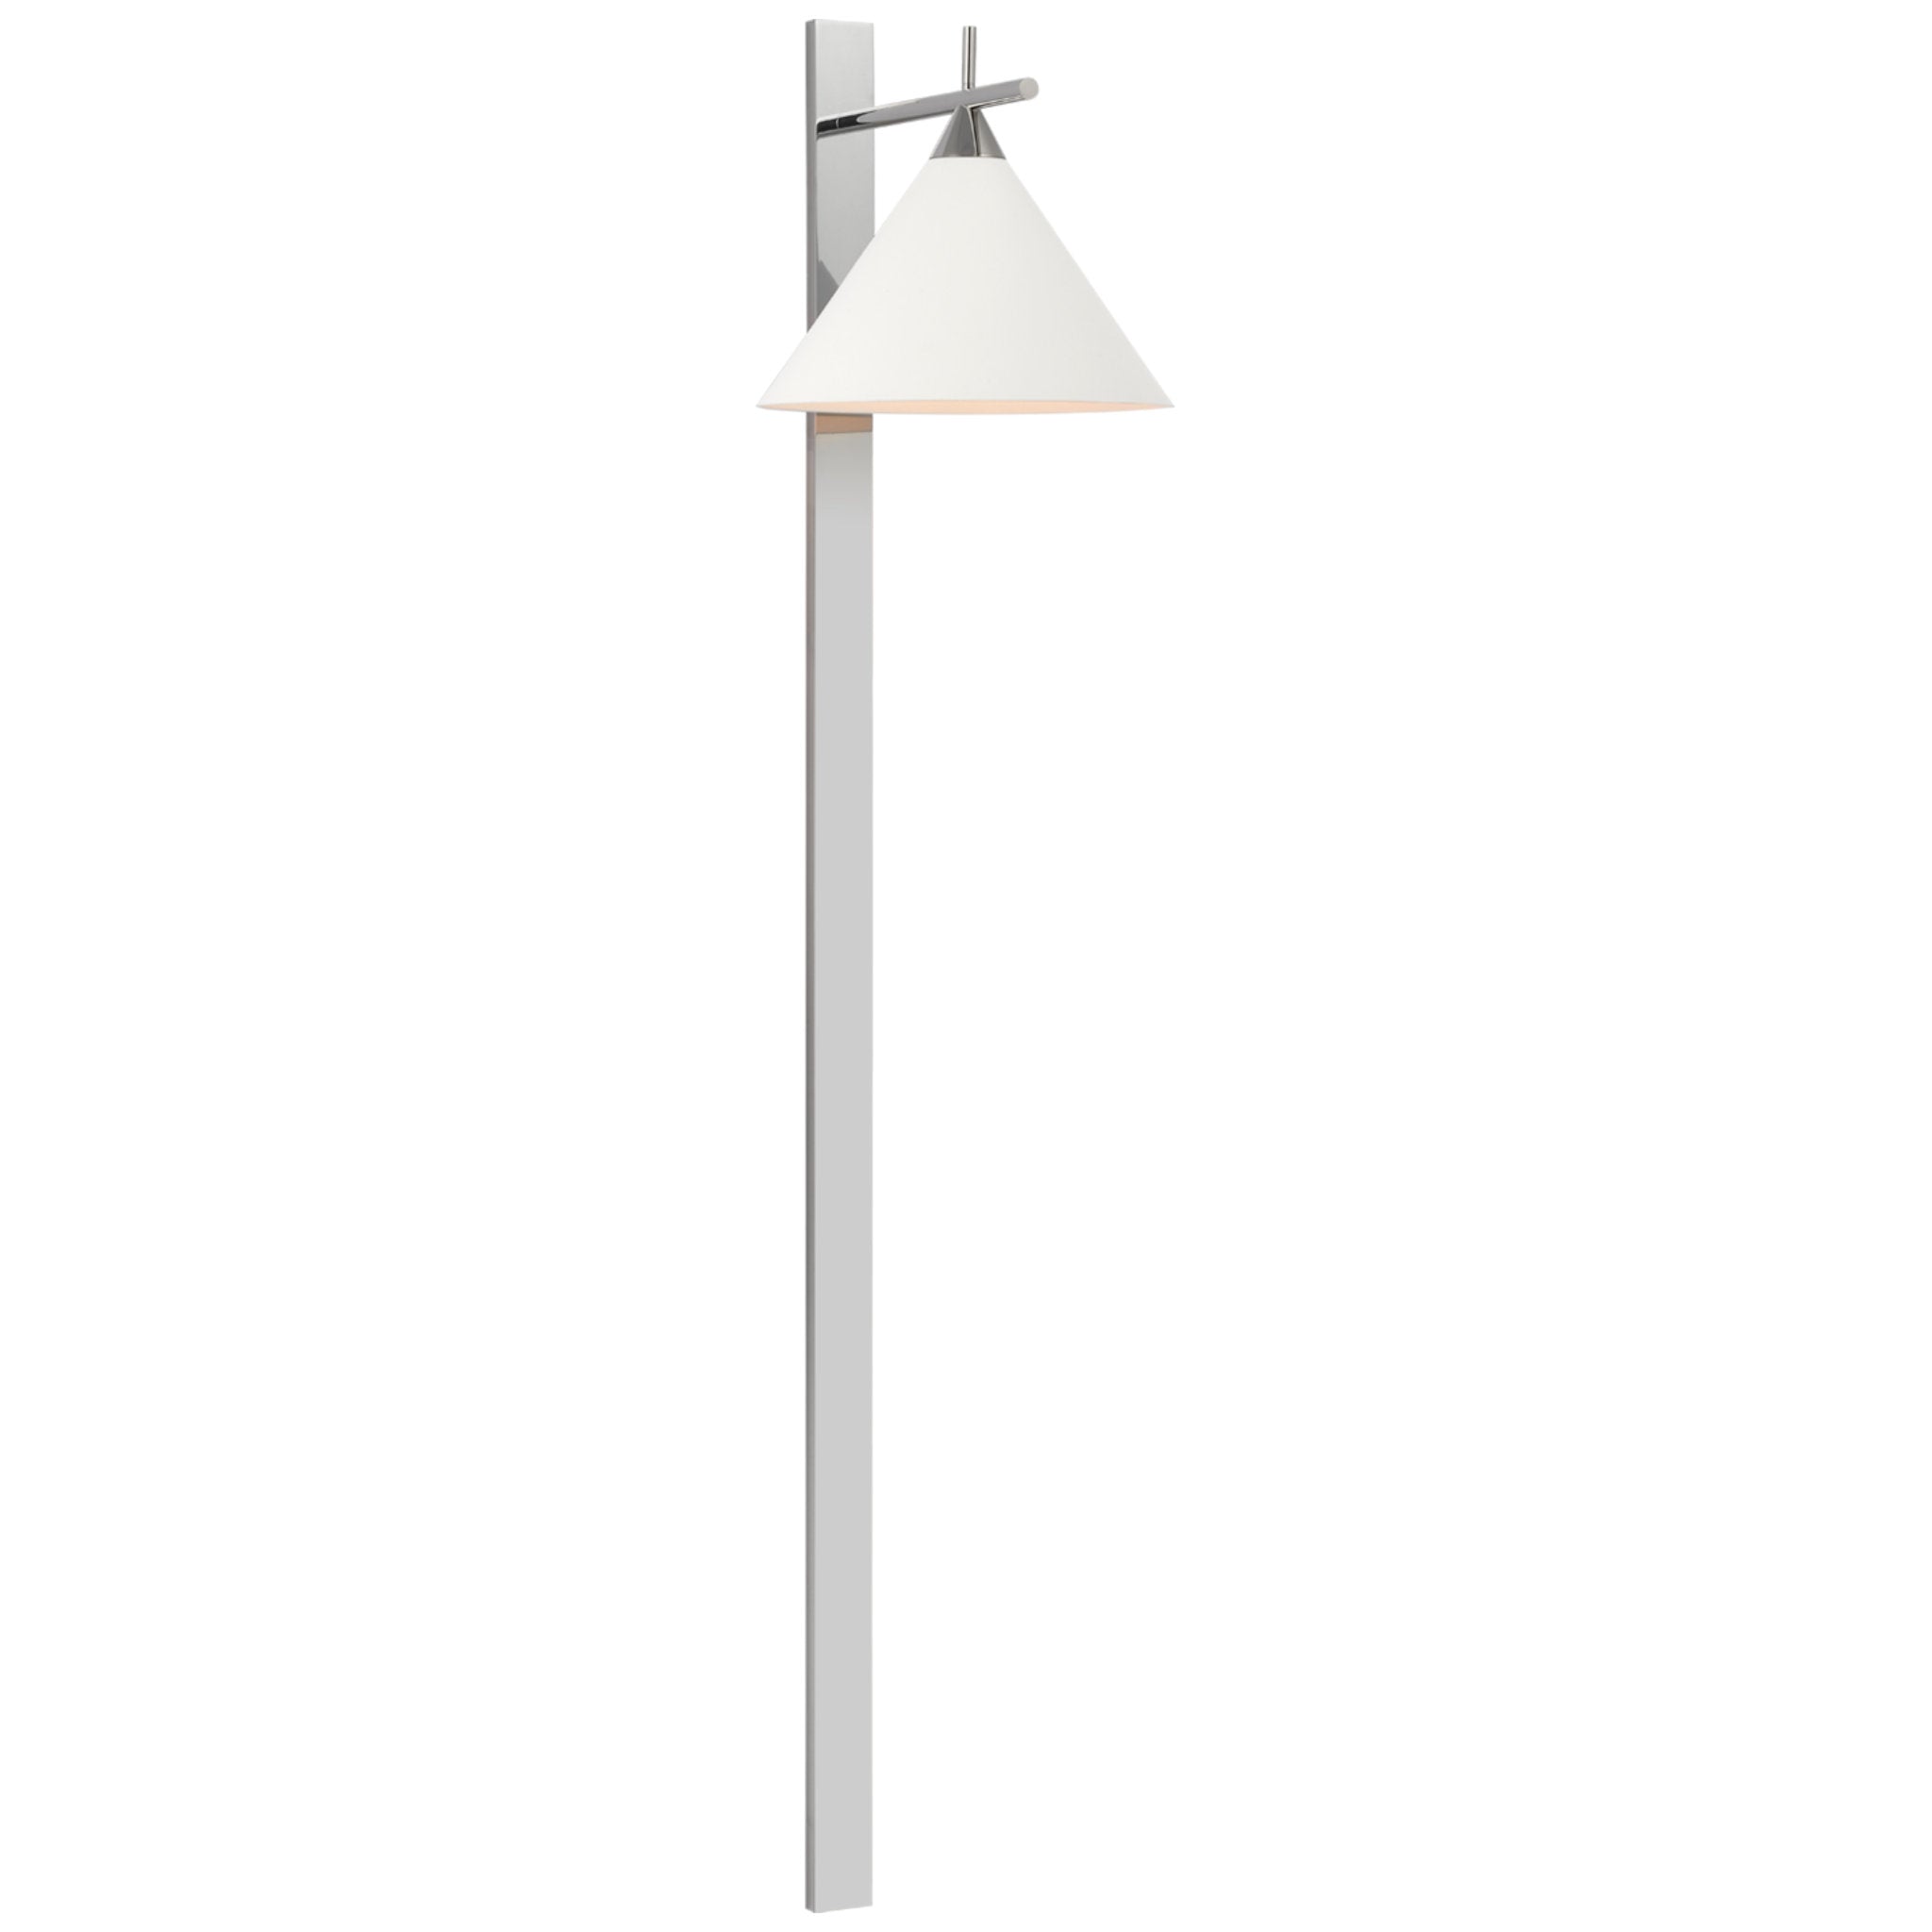 Kelly Wearstler Cleo 56" Statement Sconce in Polished Nickel with Matte White Shade